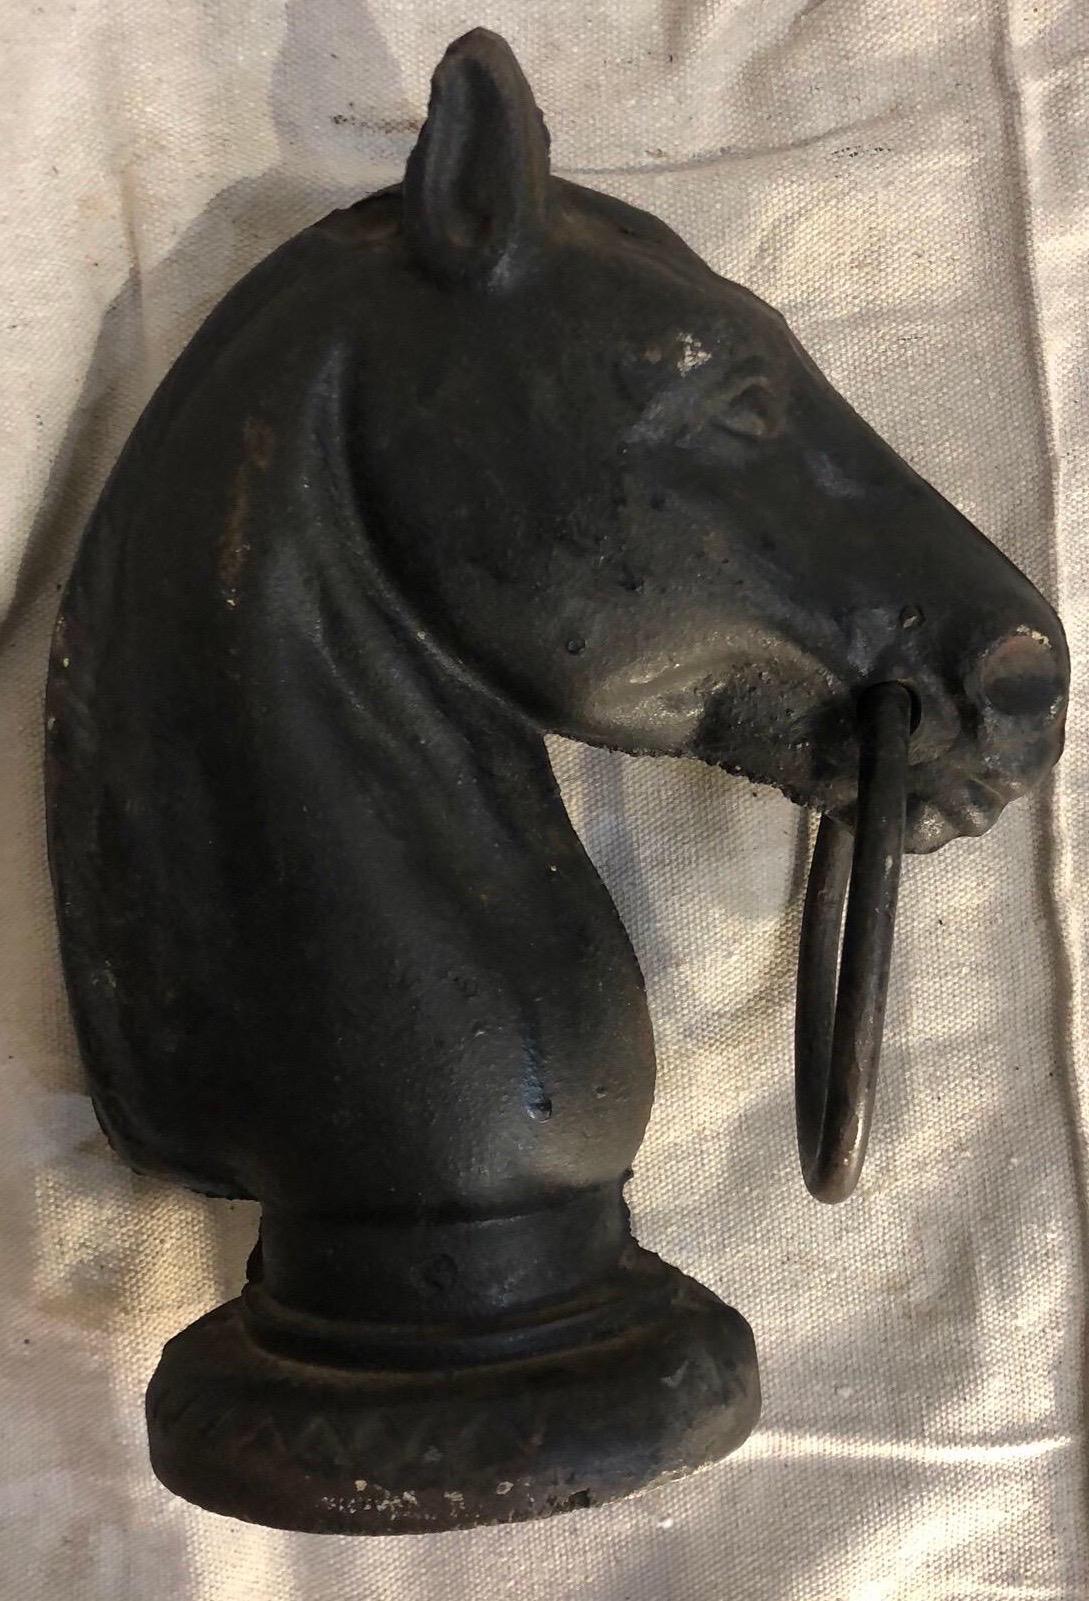 19th century horse head cast iron hitching post, American.